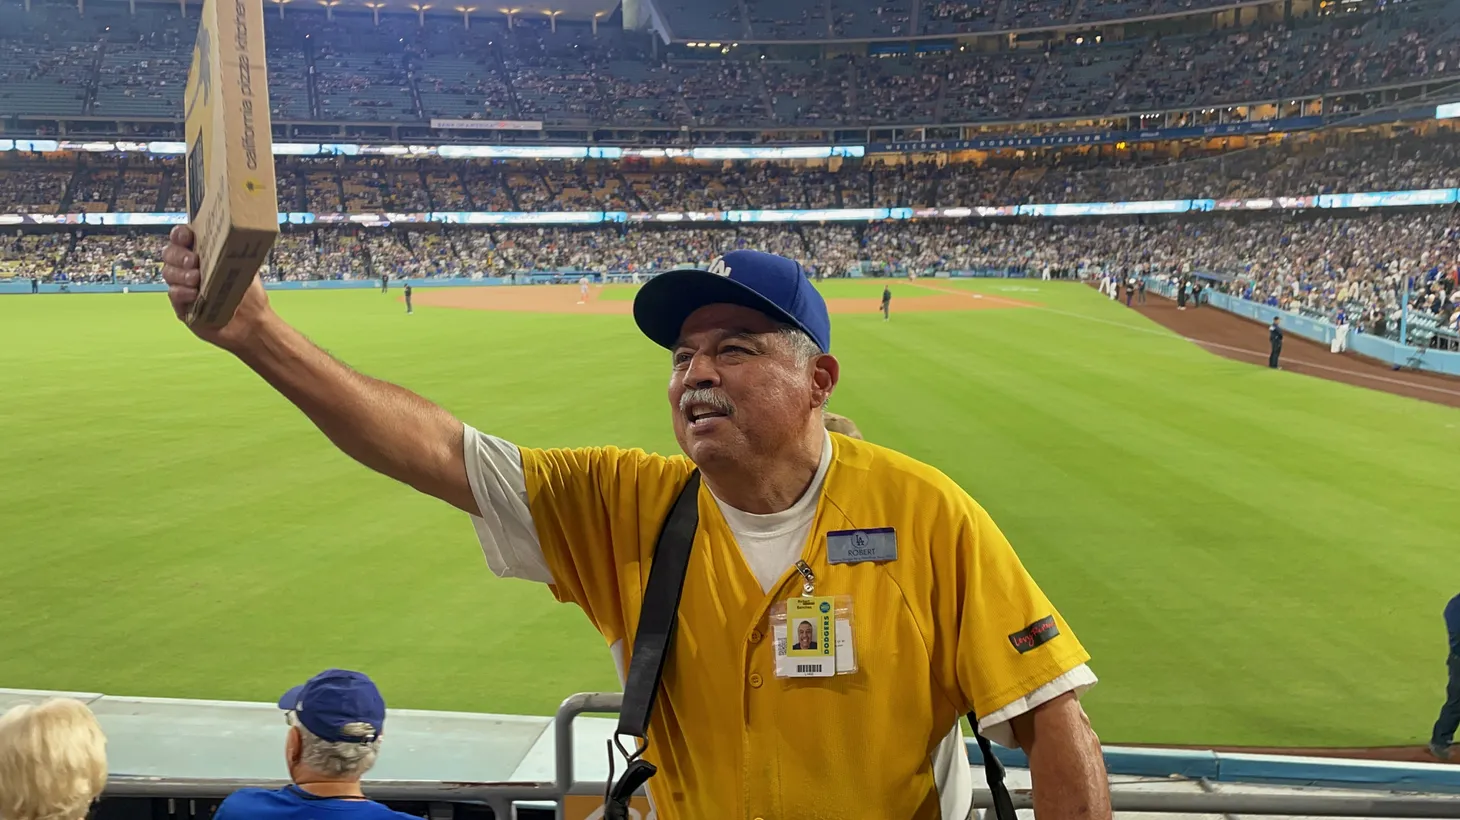 It's still wow': Pnutman on working at Dodger Stadium for 50 years